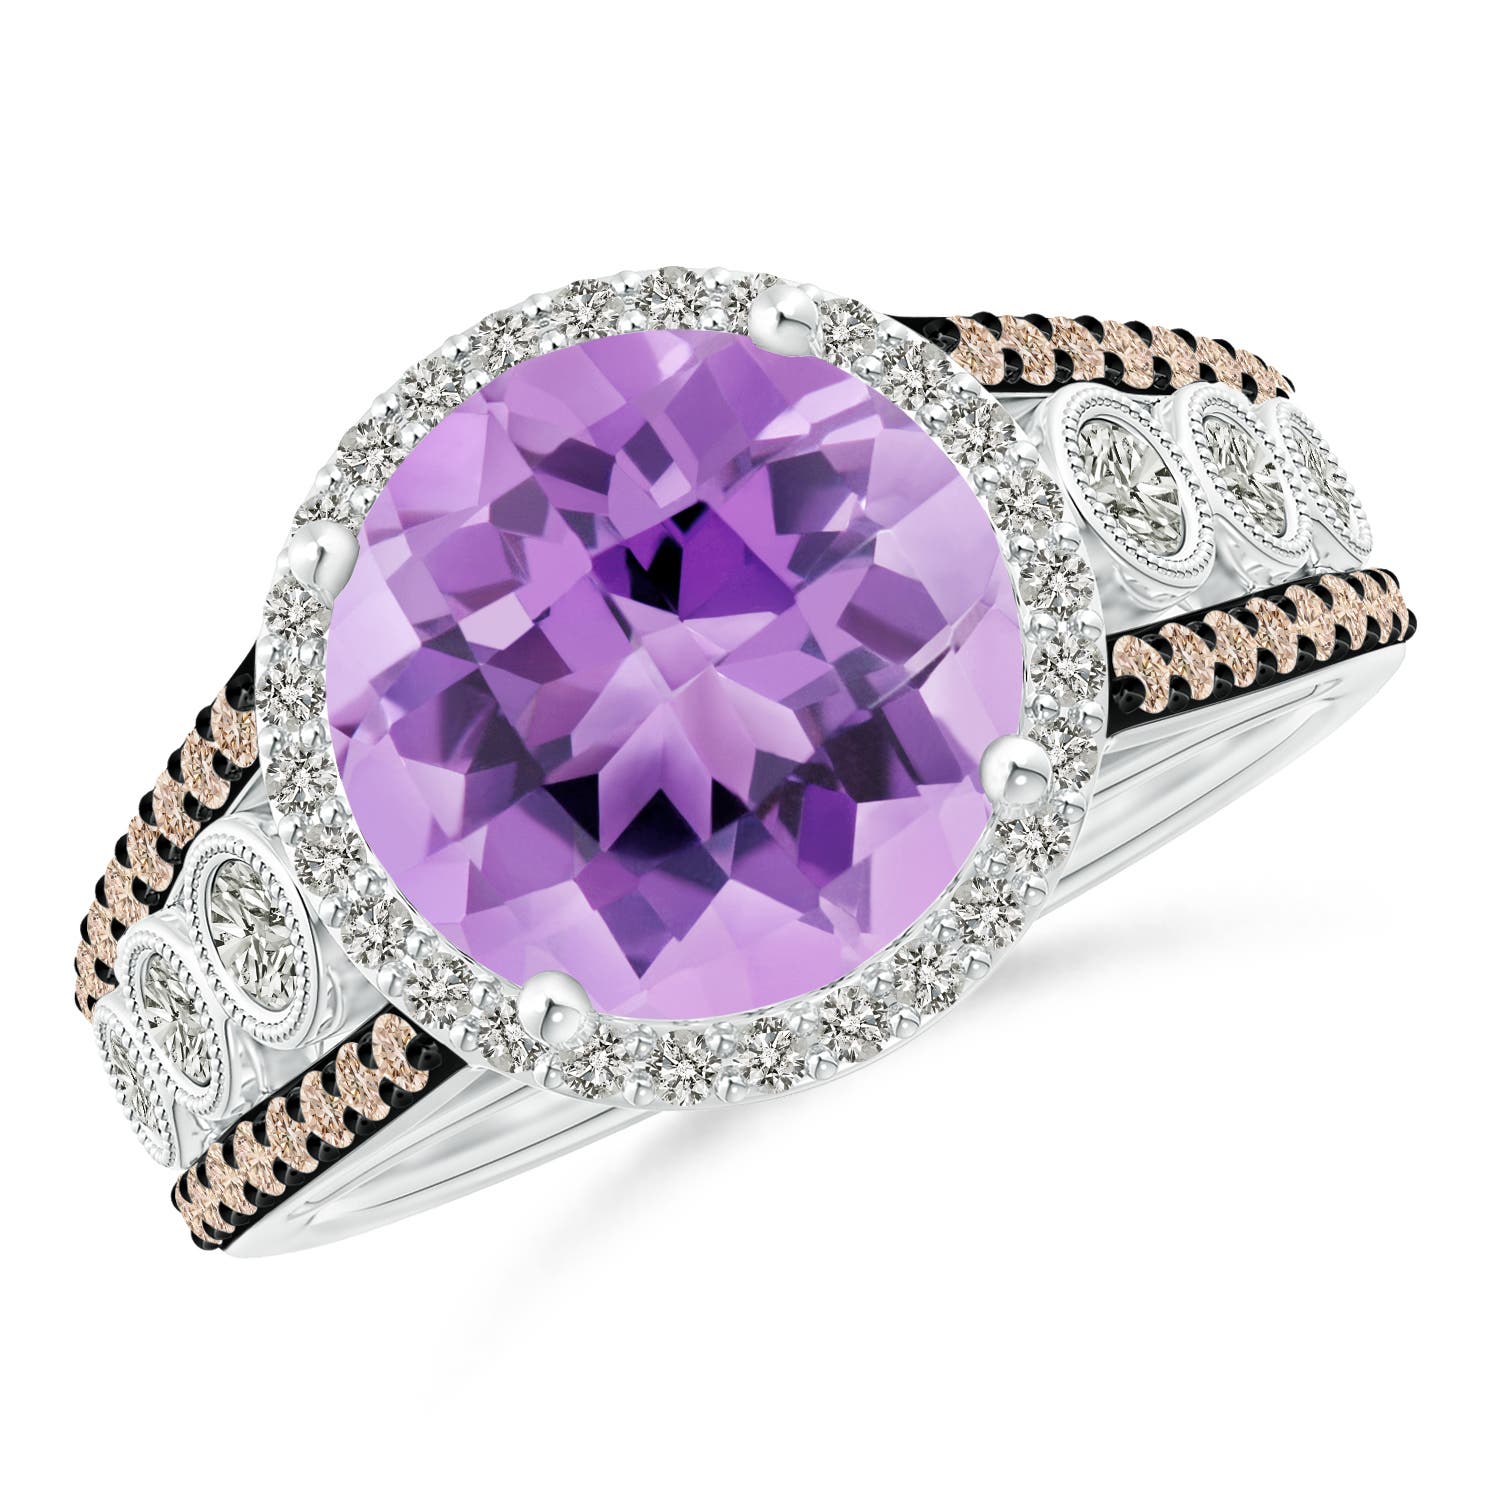 A - Amethyst / 4.42 CT / 14 KT White Gold